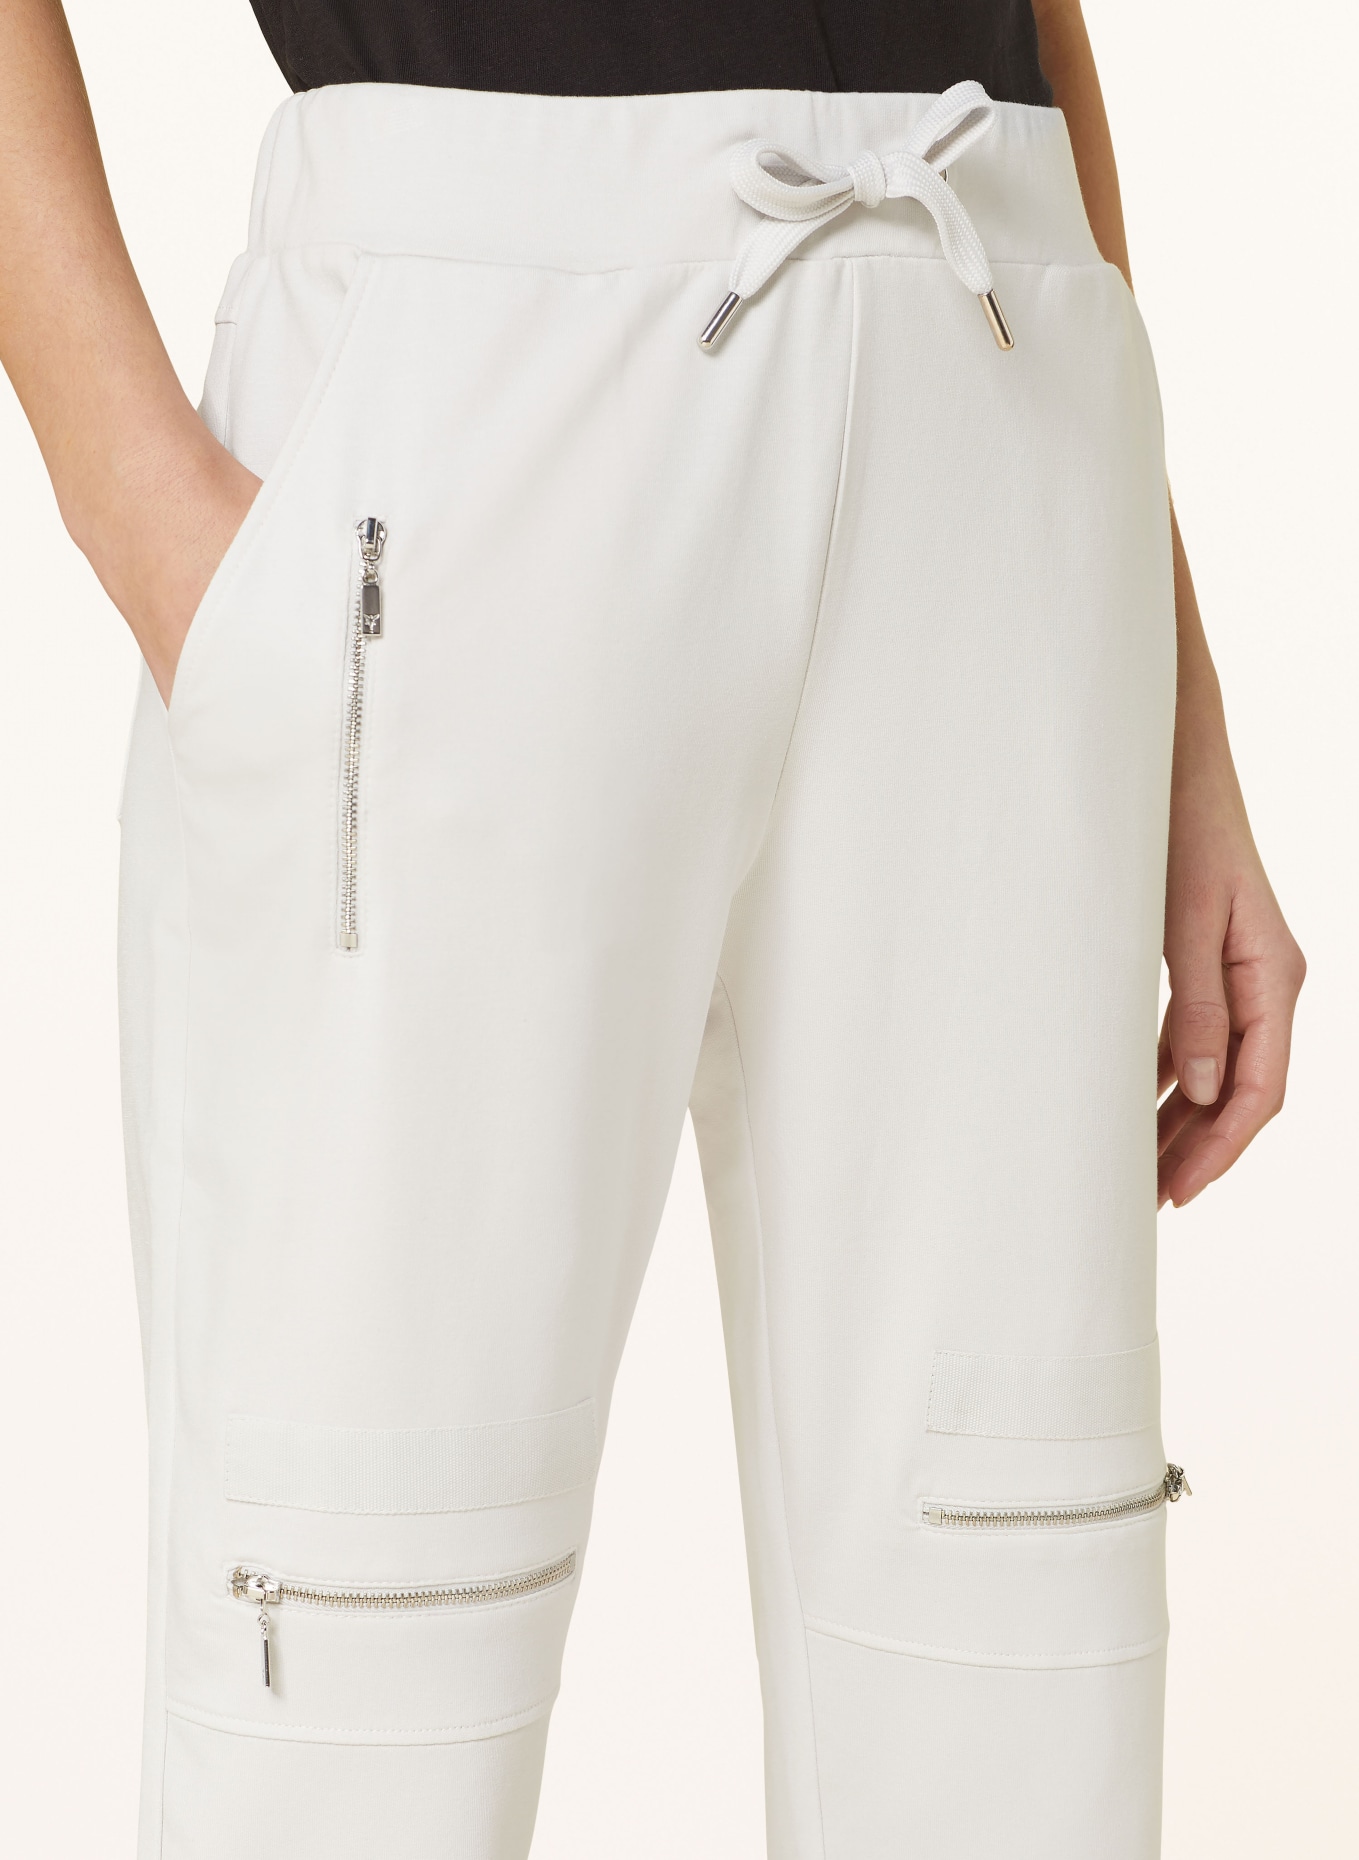 monari Jersey pants in jogger style, Color: LIGHT GRAY (Image 5)